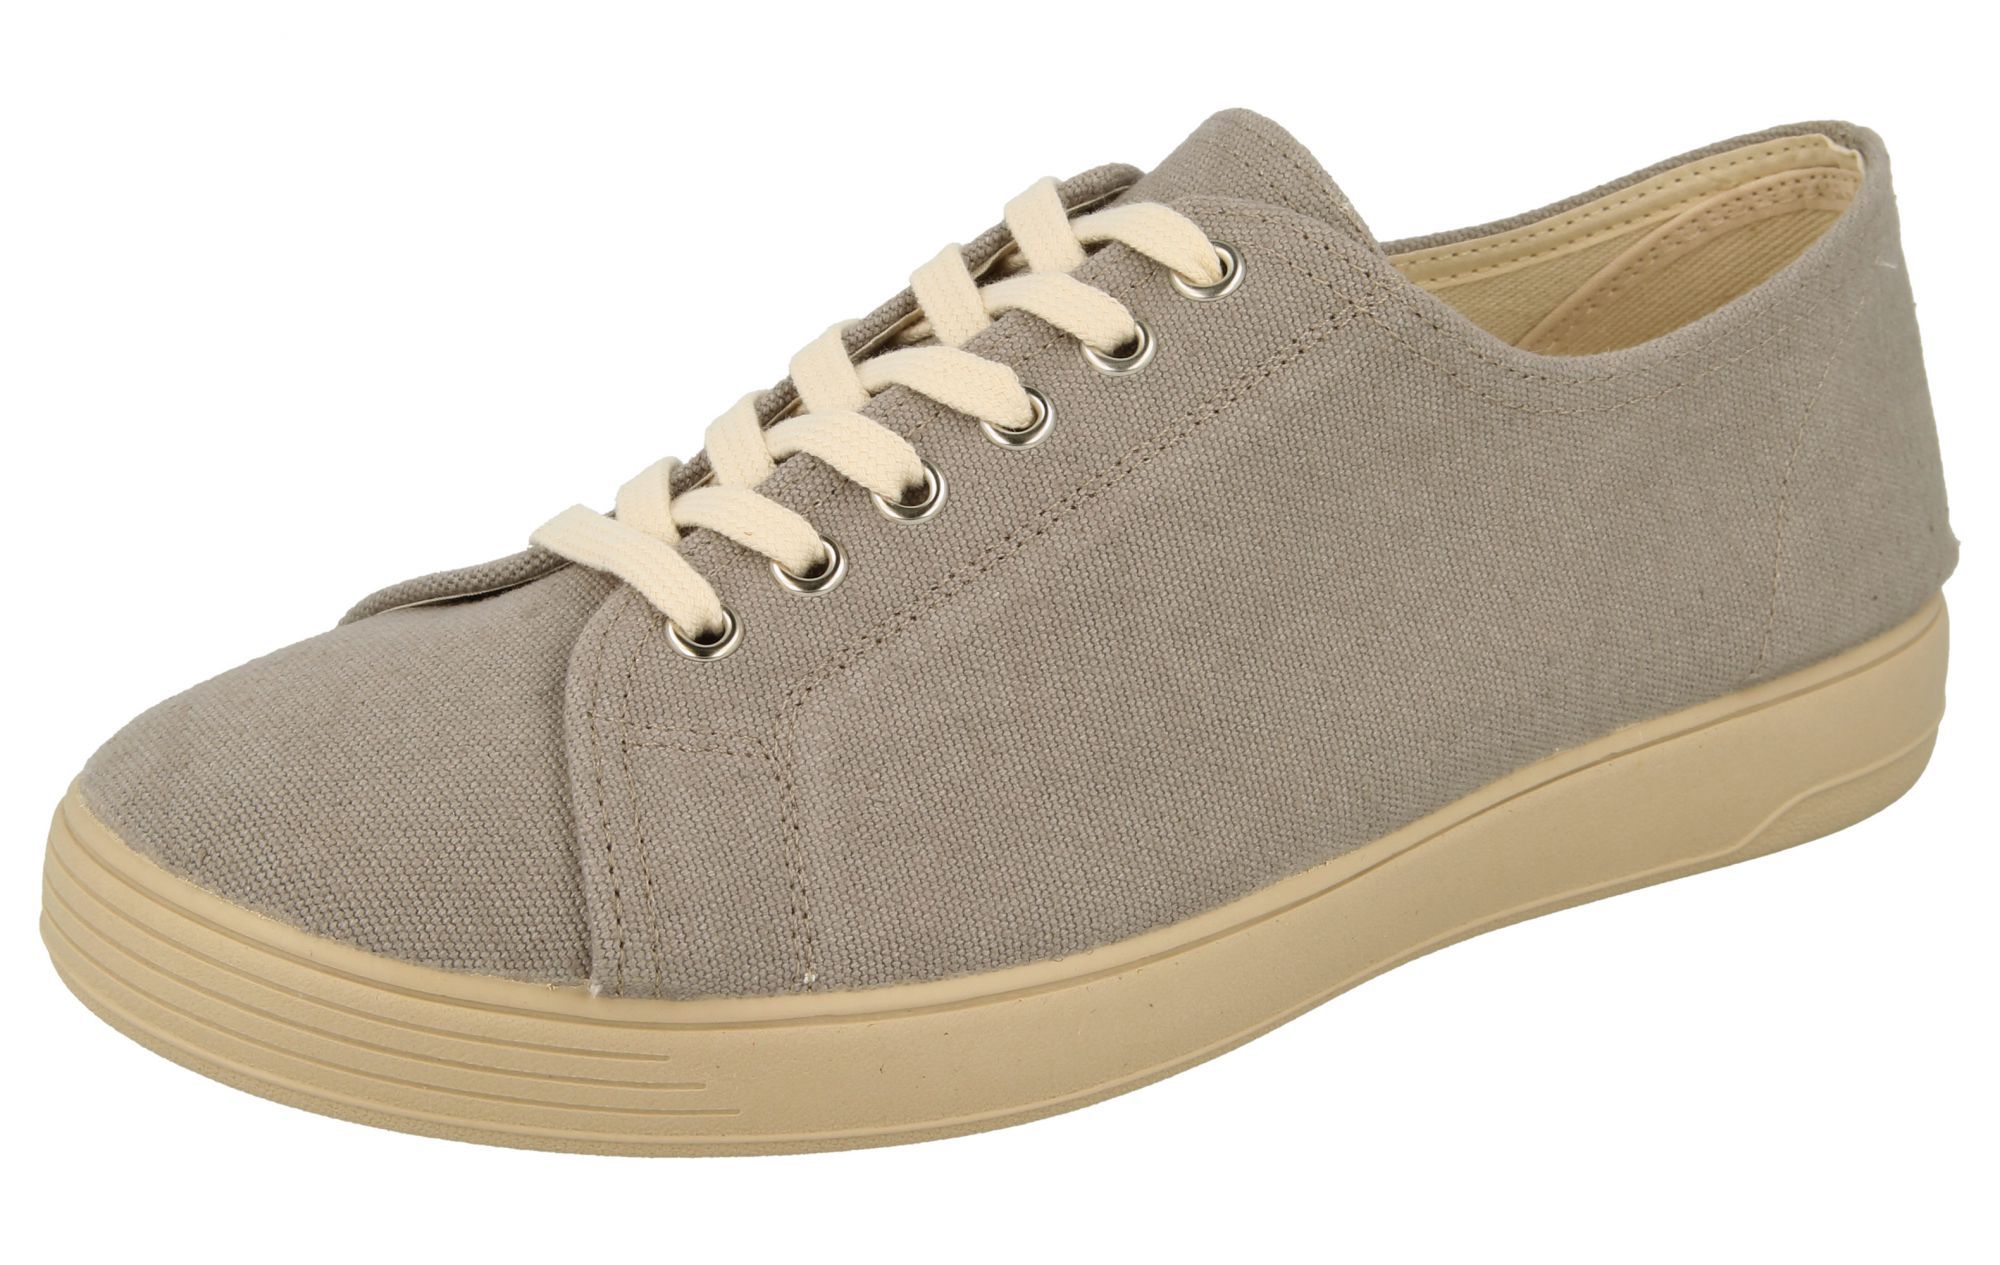 DB Wider Fit Rio Canvas Shoes